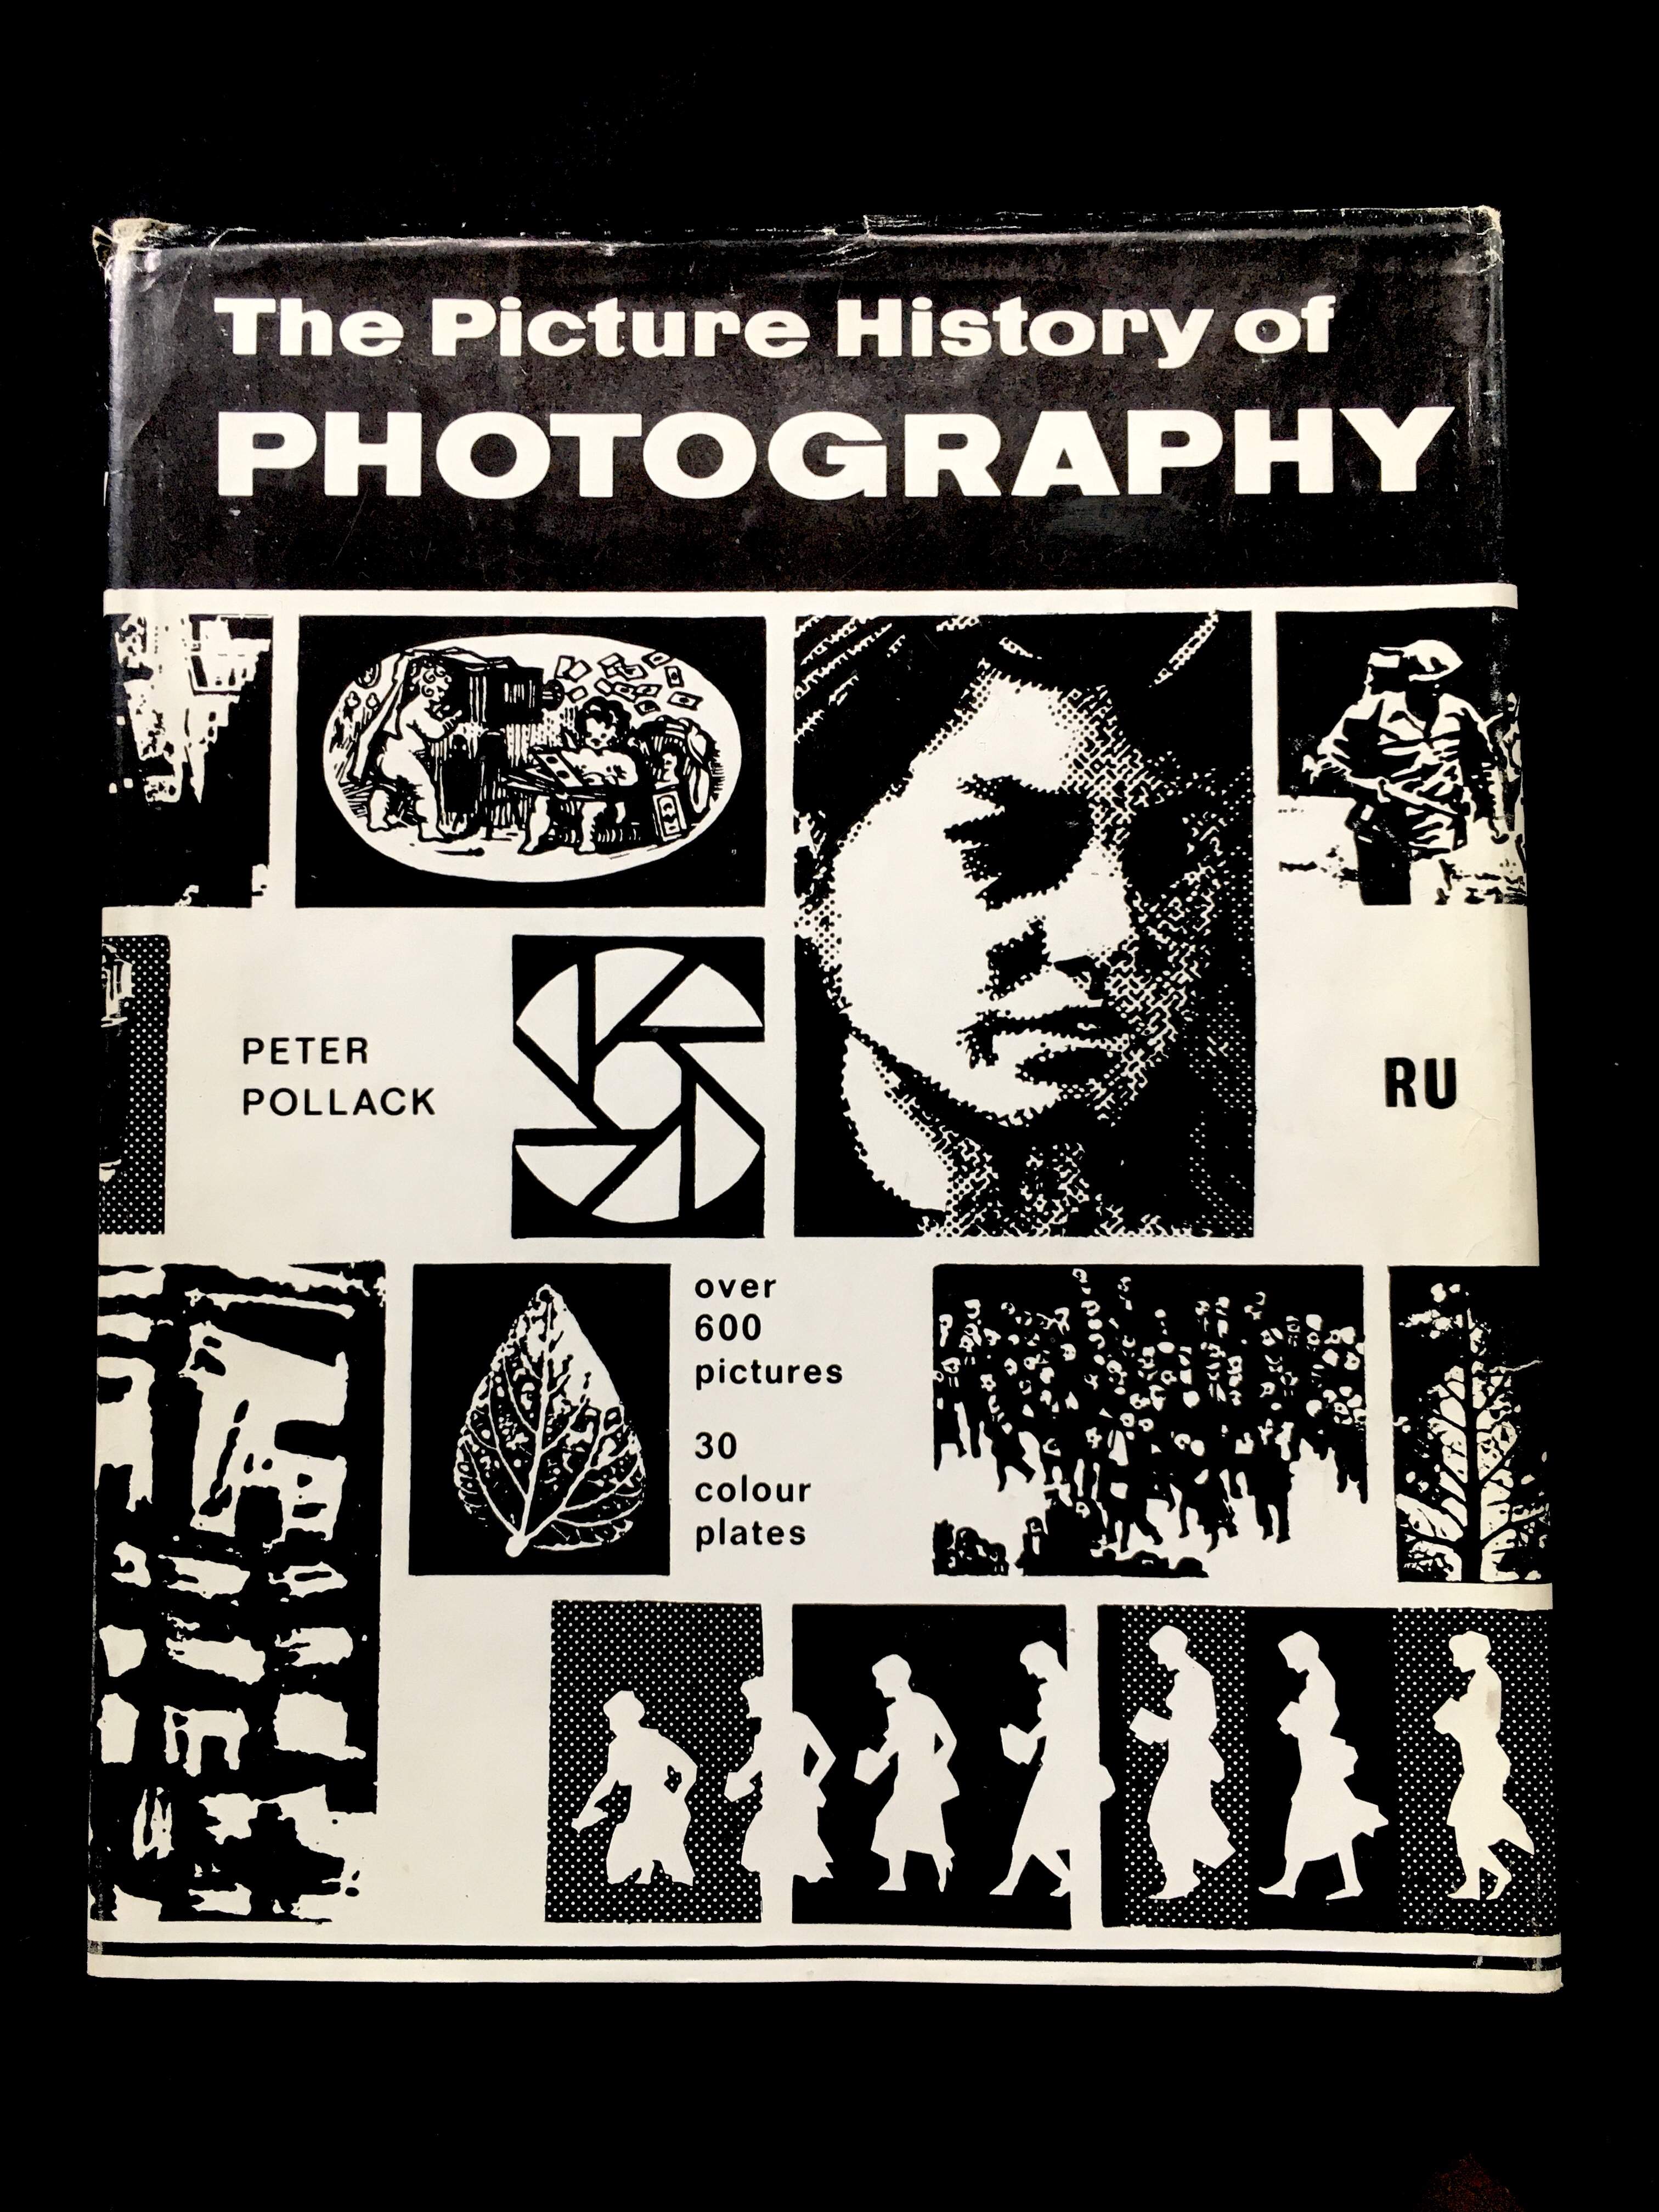 The Picture History of Photography. From the Earliest Beginnings to the Present Day by Peter Pollack